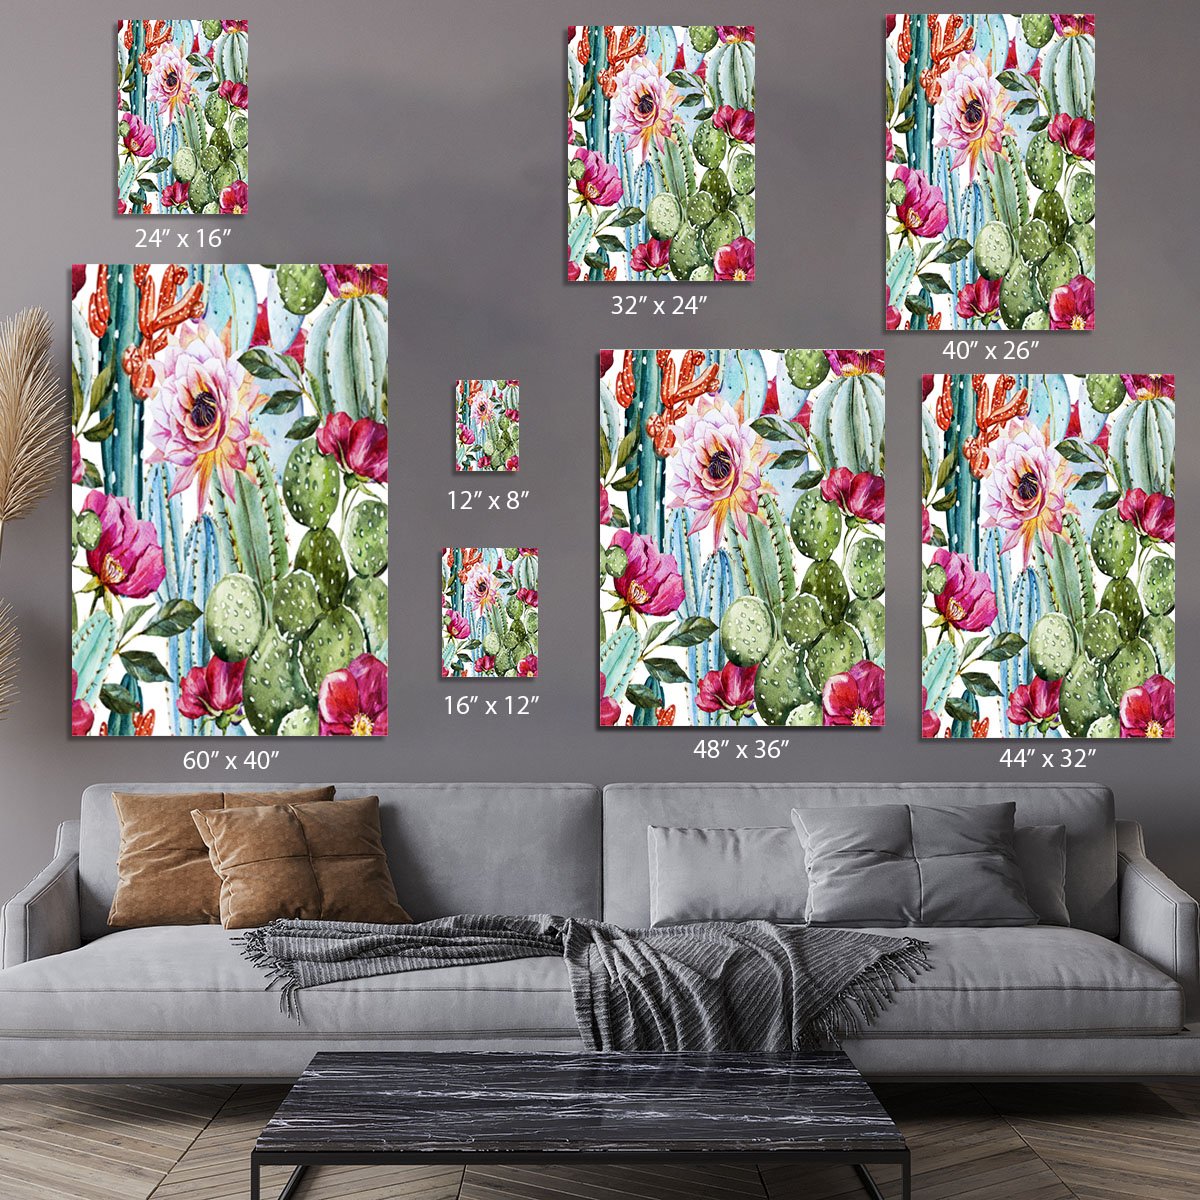 Watercolor cactus pattern Canvas Print or Poster